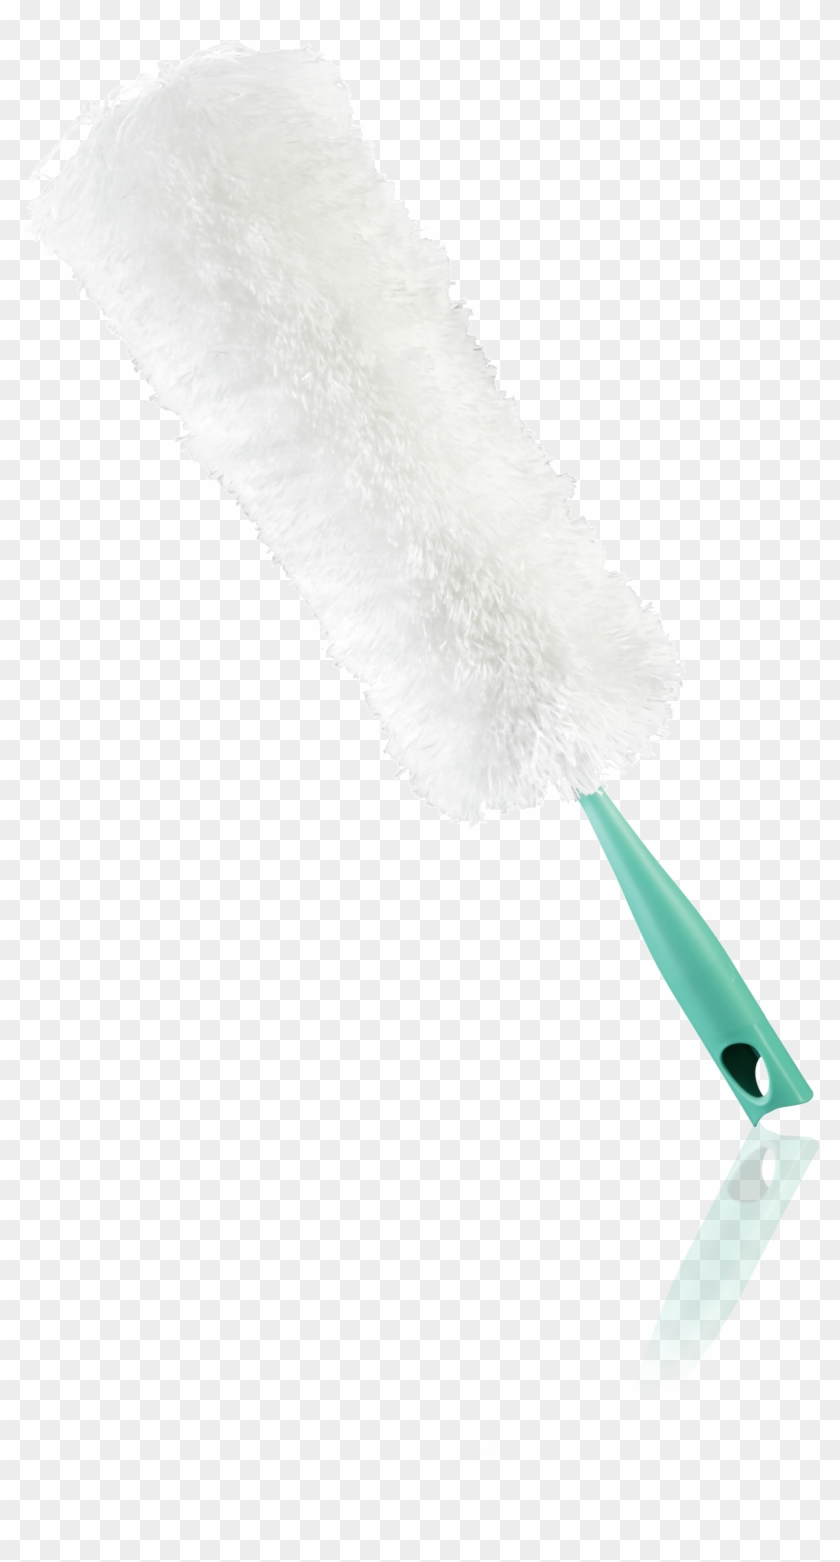 Feather Duster Xl - Leifheit Duster Xl Plastic Turquoise,white Cleaning Clipart #5690536